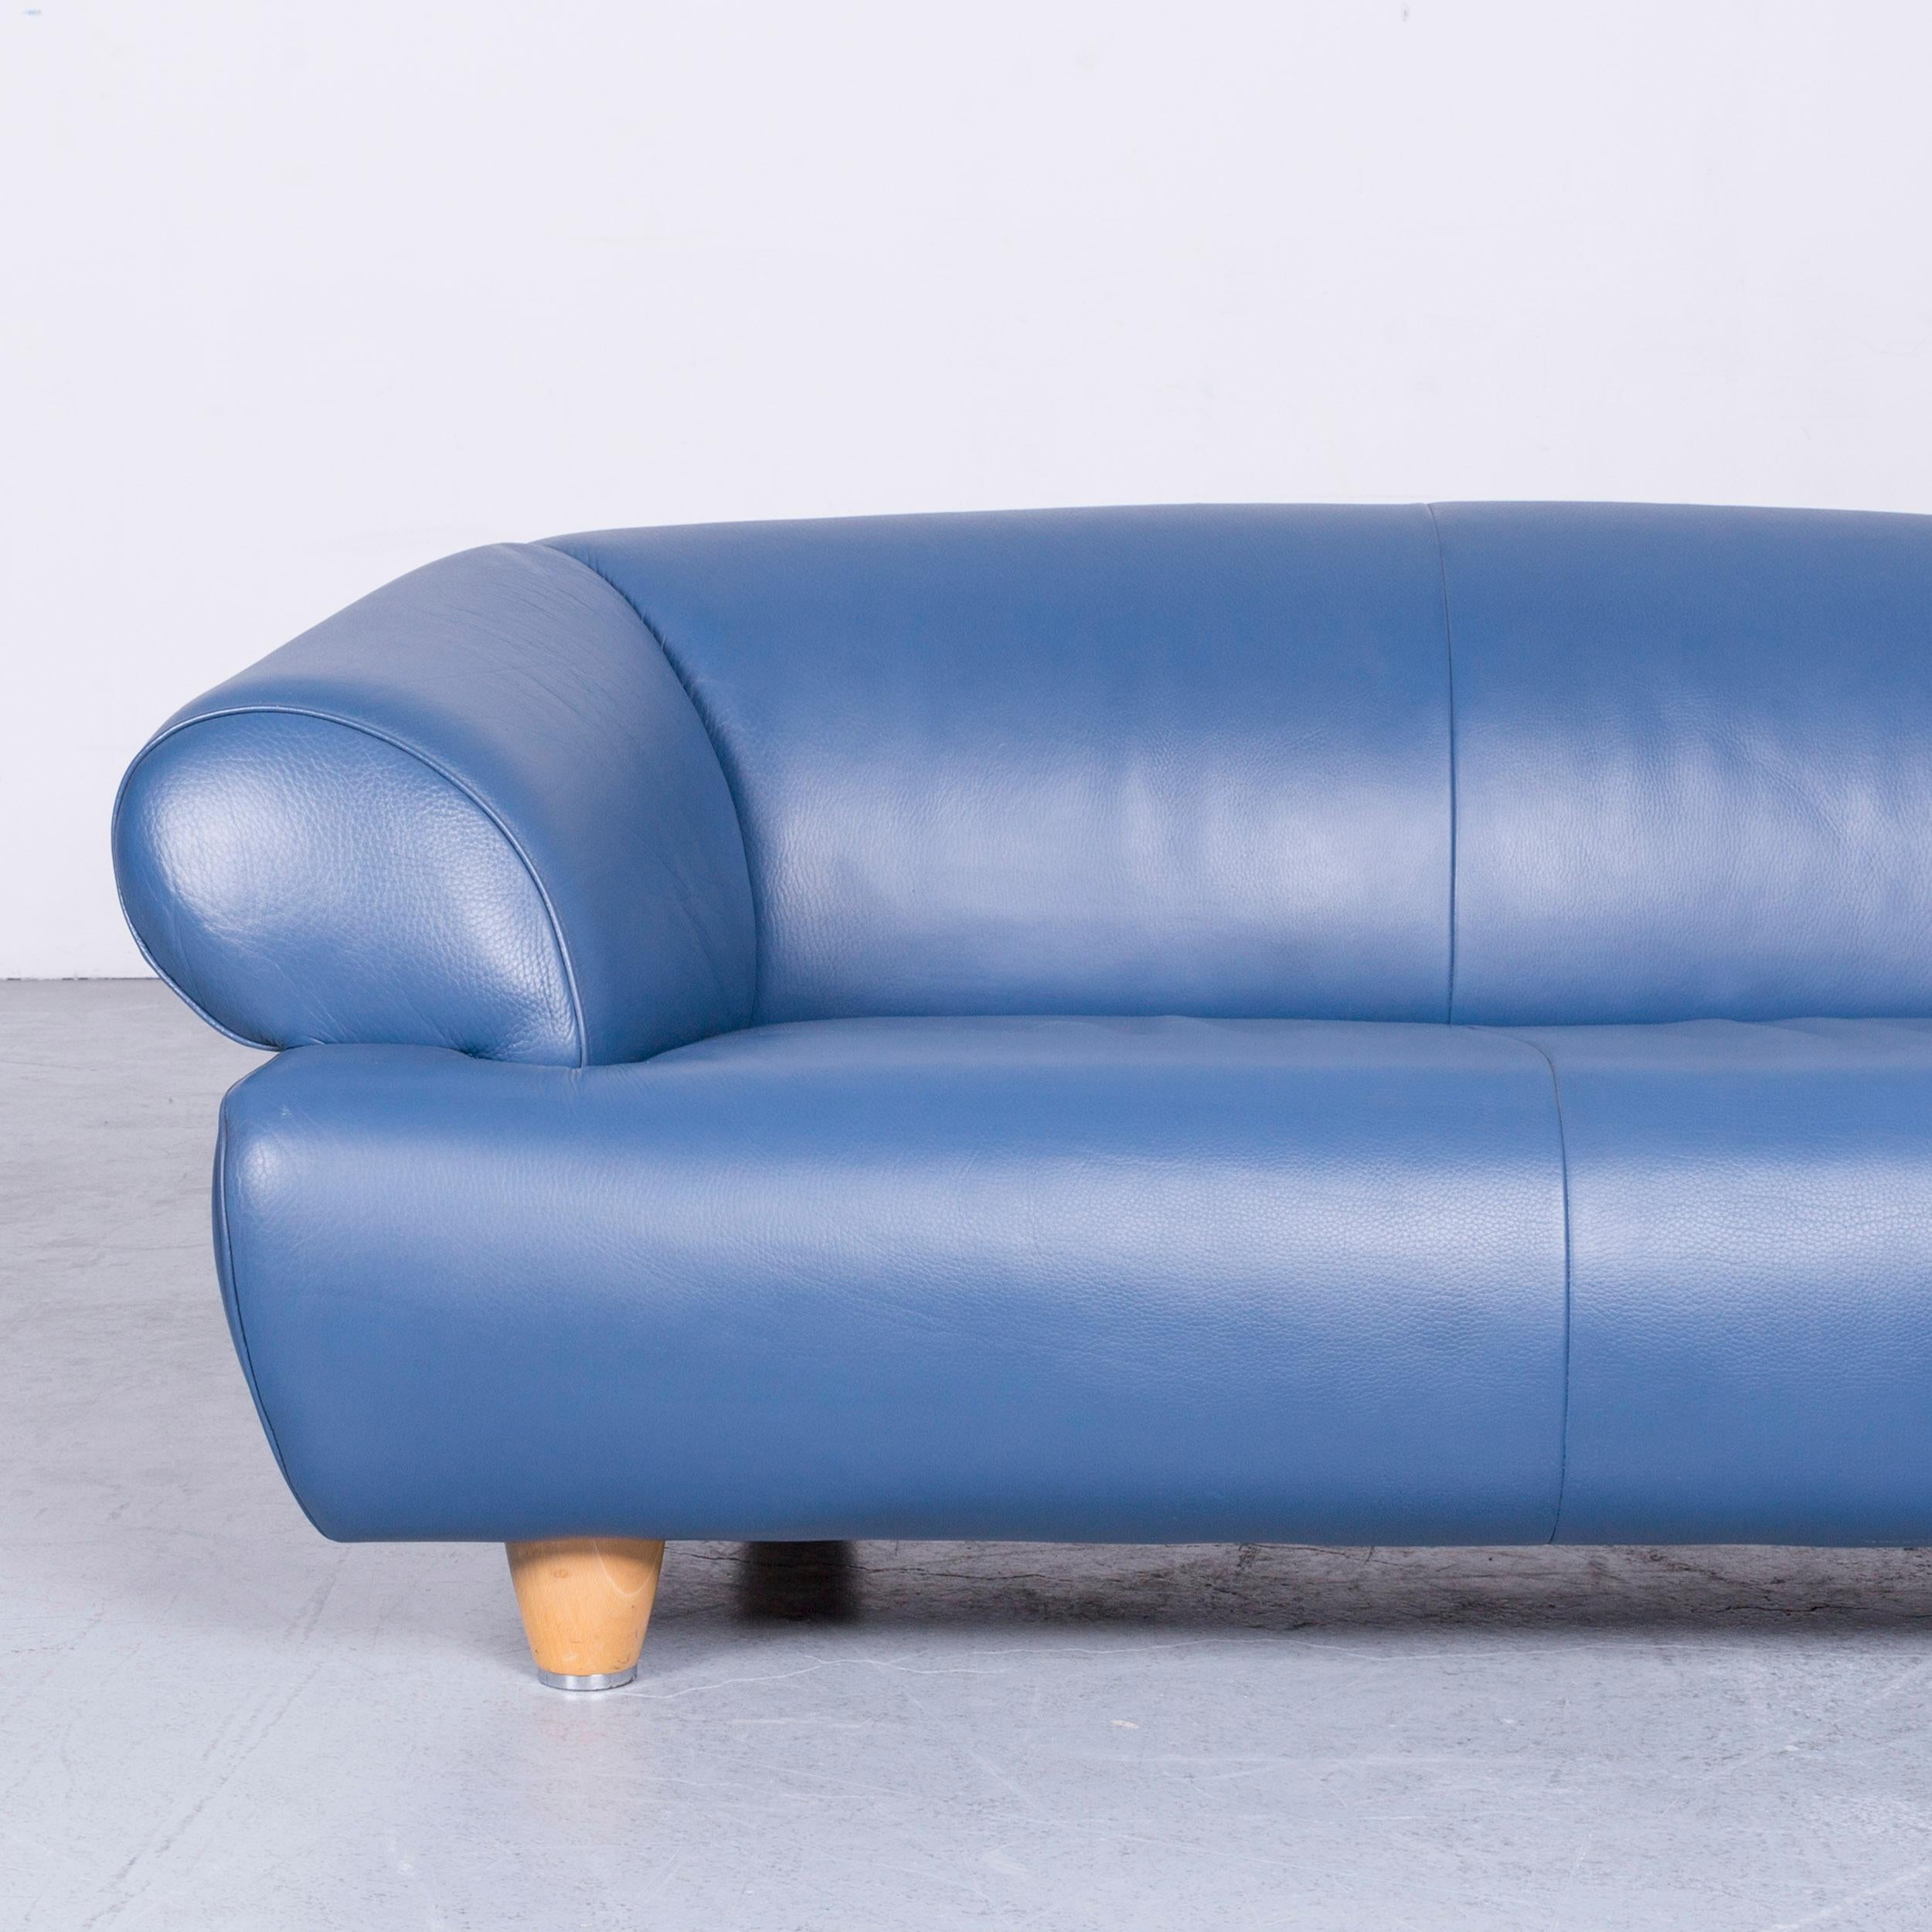 Swiss De Sede DS 91 Designer Sofa Leather Blue Two-Seat Couch Modern